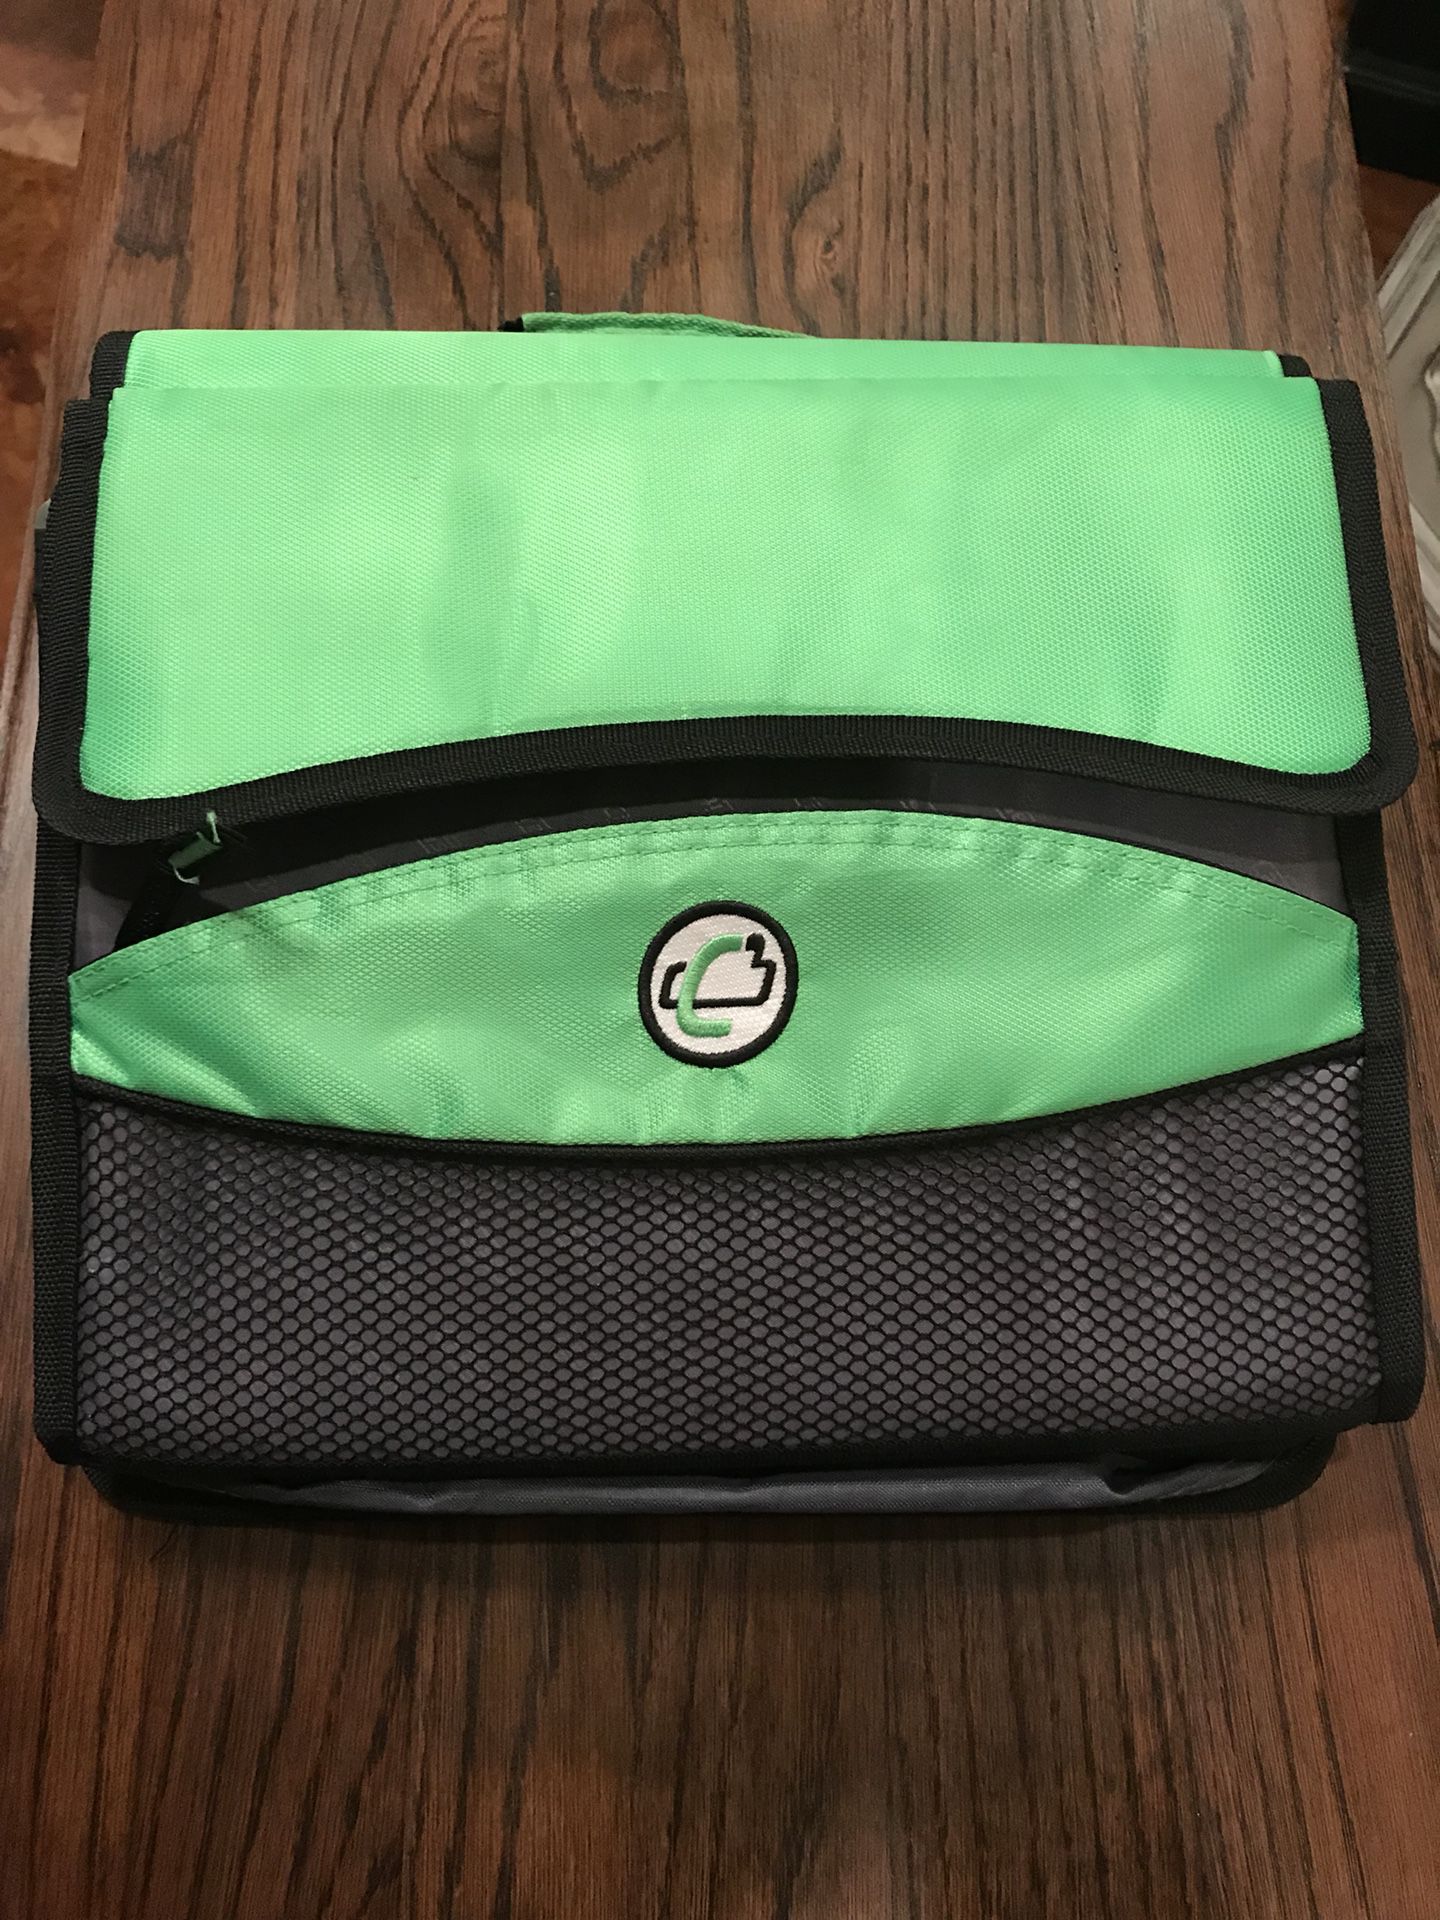 Lime green zip up binder with filing attachment.